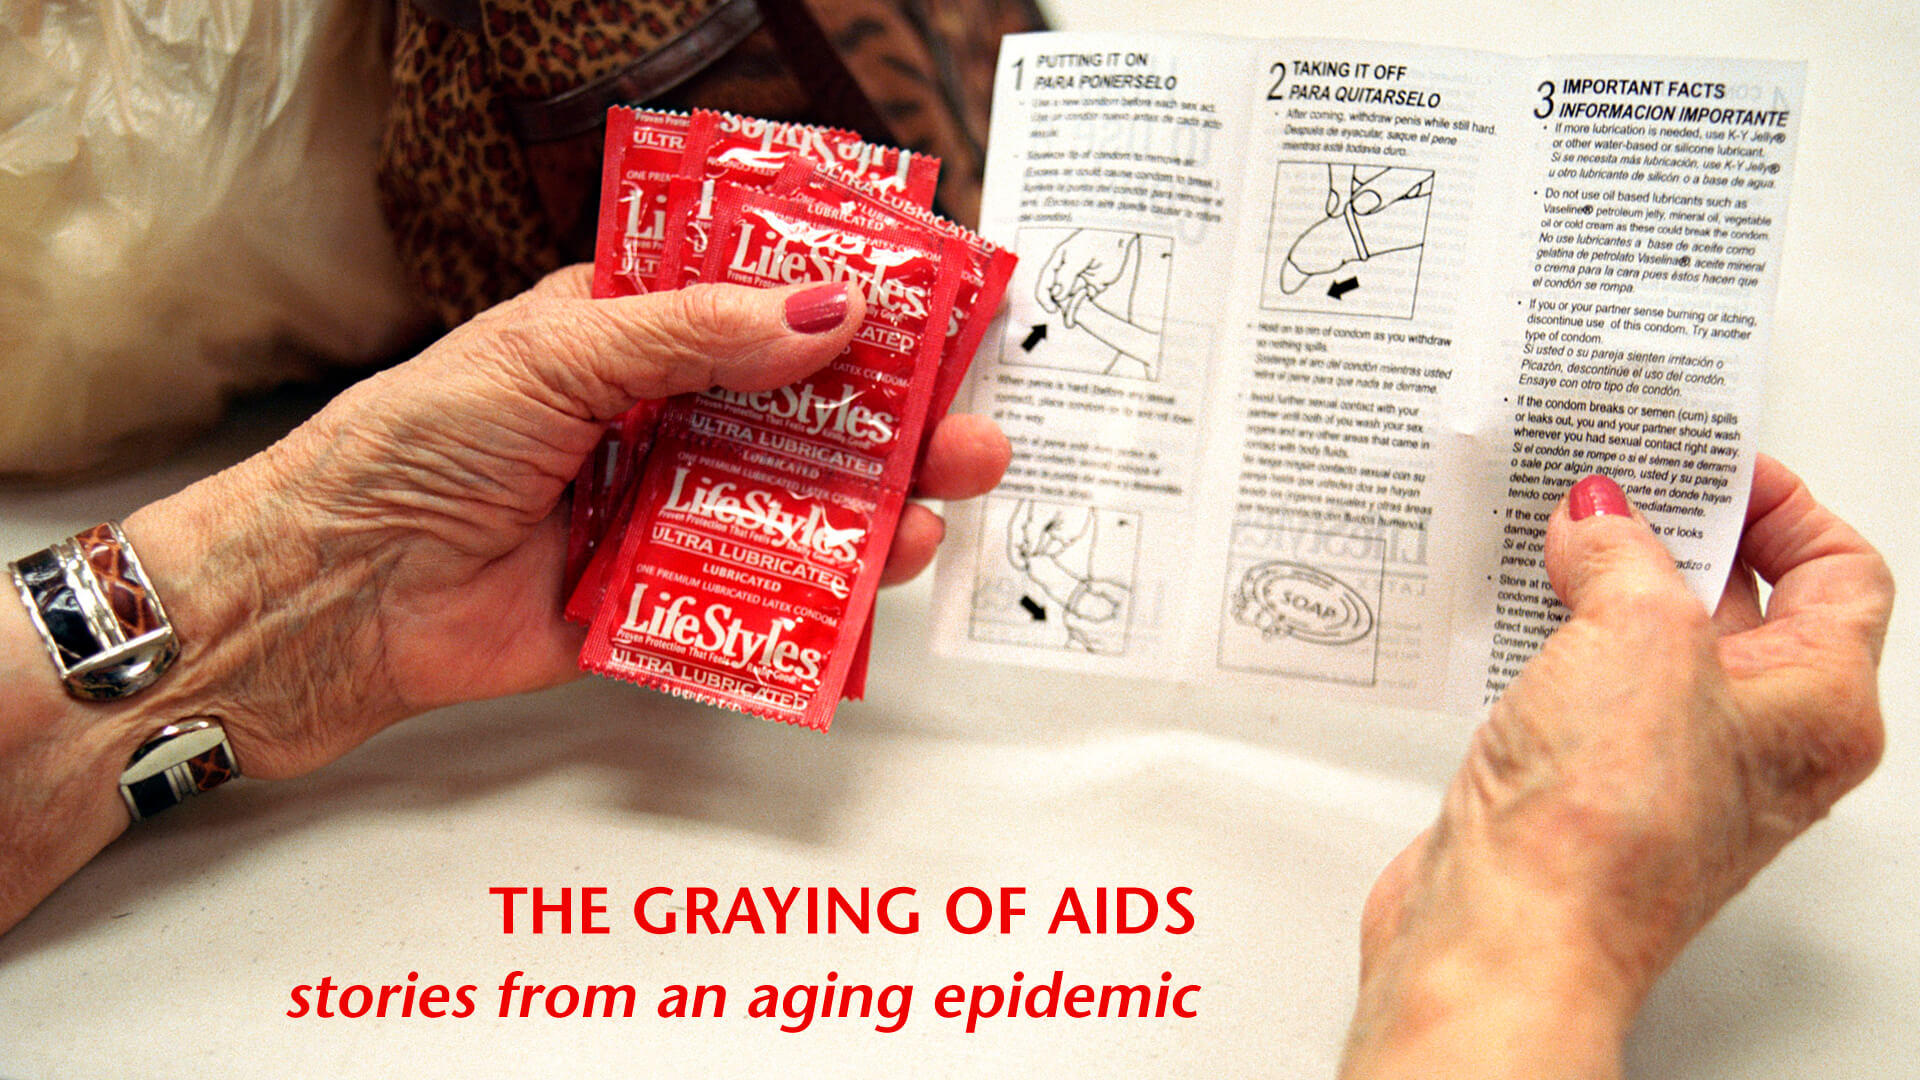 A graphic from The Graying of AIDS. A photo of a person's hands holding a bunch of condoms and a set of instructions for how to put on a condom. Their nails are painted red. There is red text on the bottom of the image that reads, "THE GRAYING OF AIDS stories from an aging epidemic".